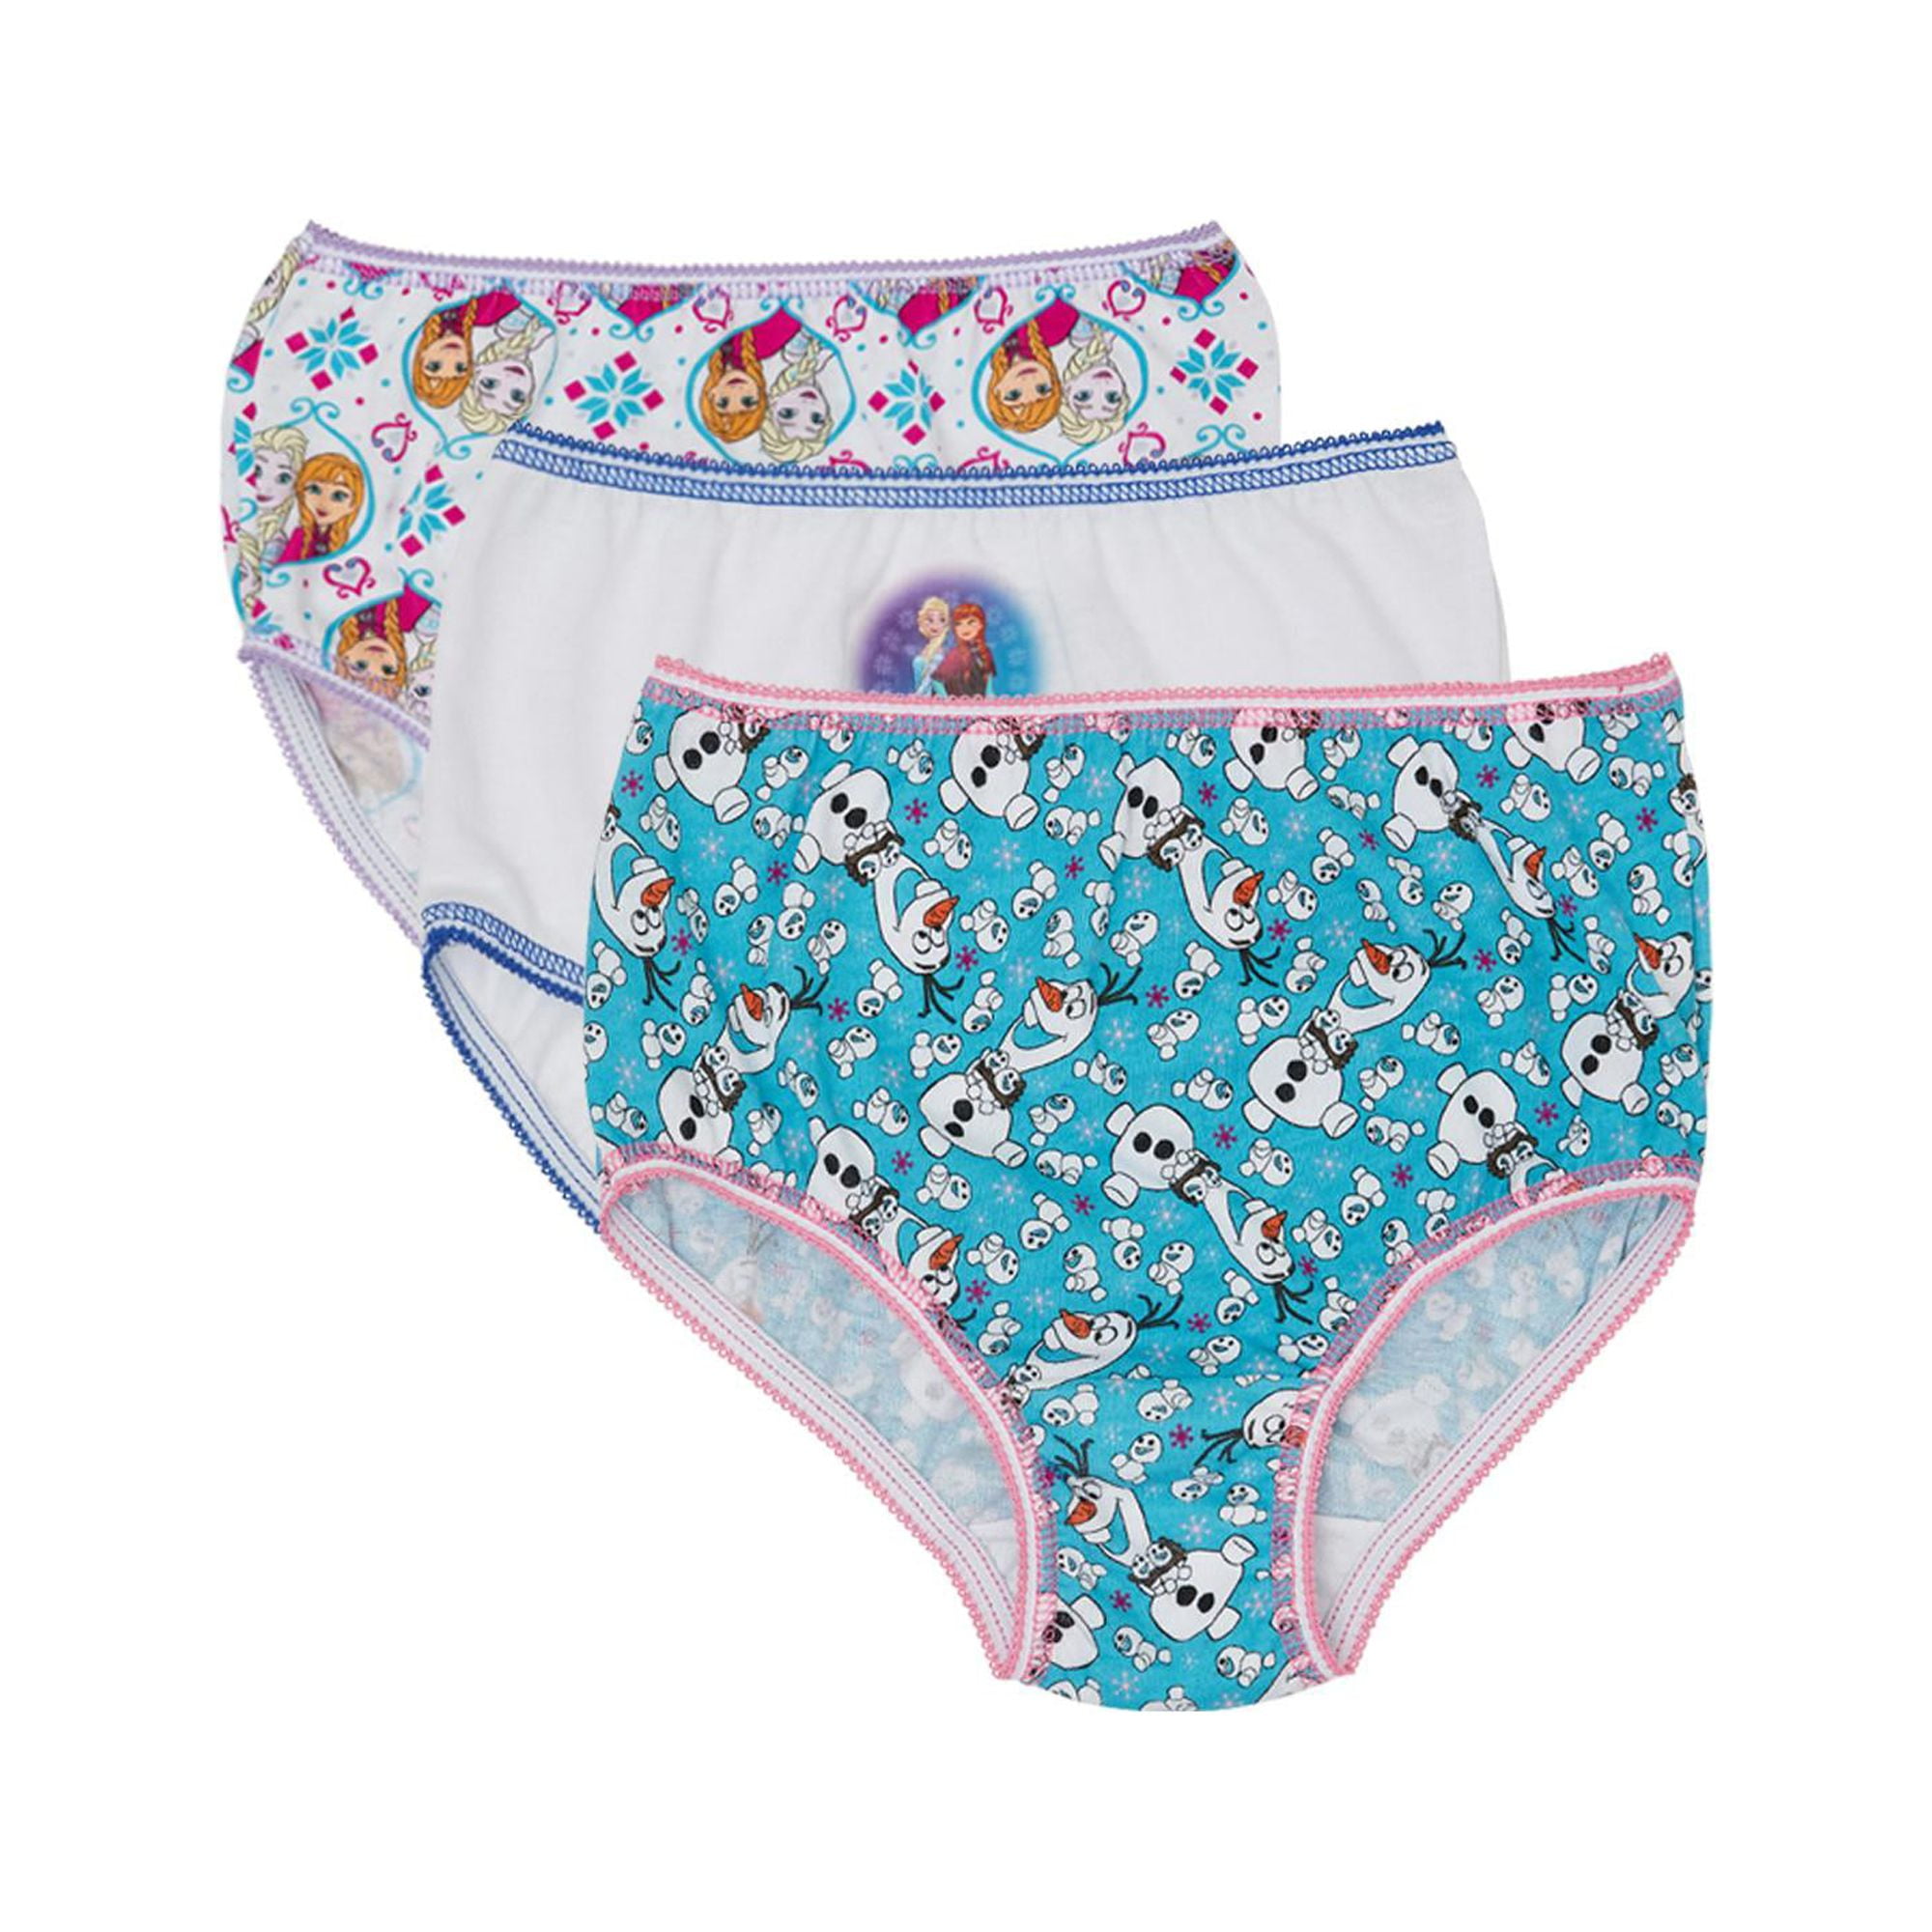 Disney Frozen Girls Knickers, Multipack Briefs For Girls, Ages 3